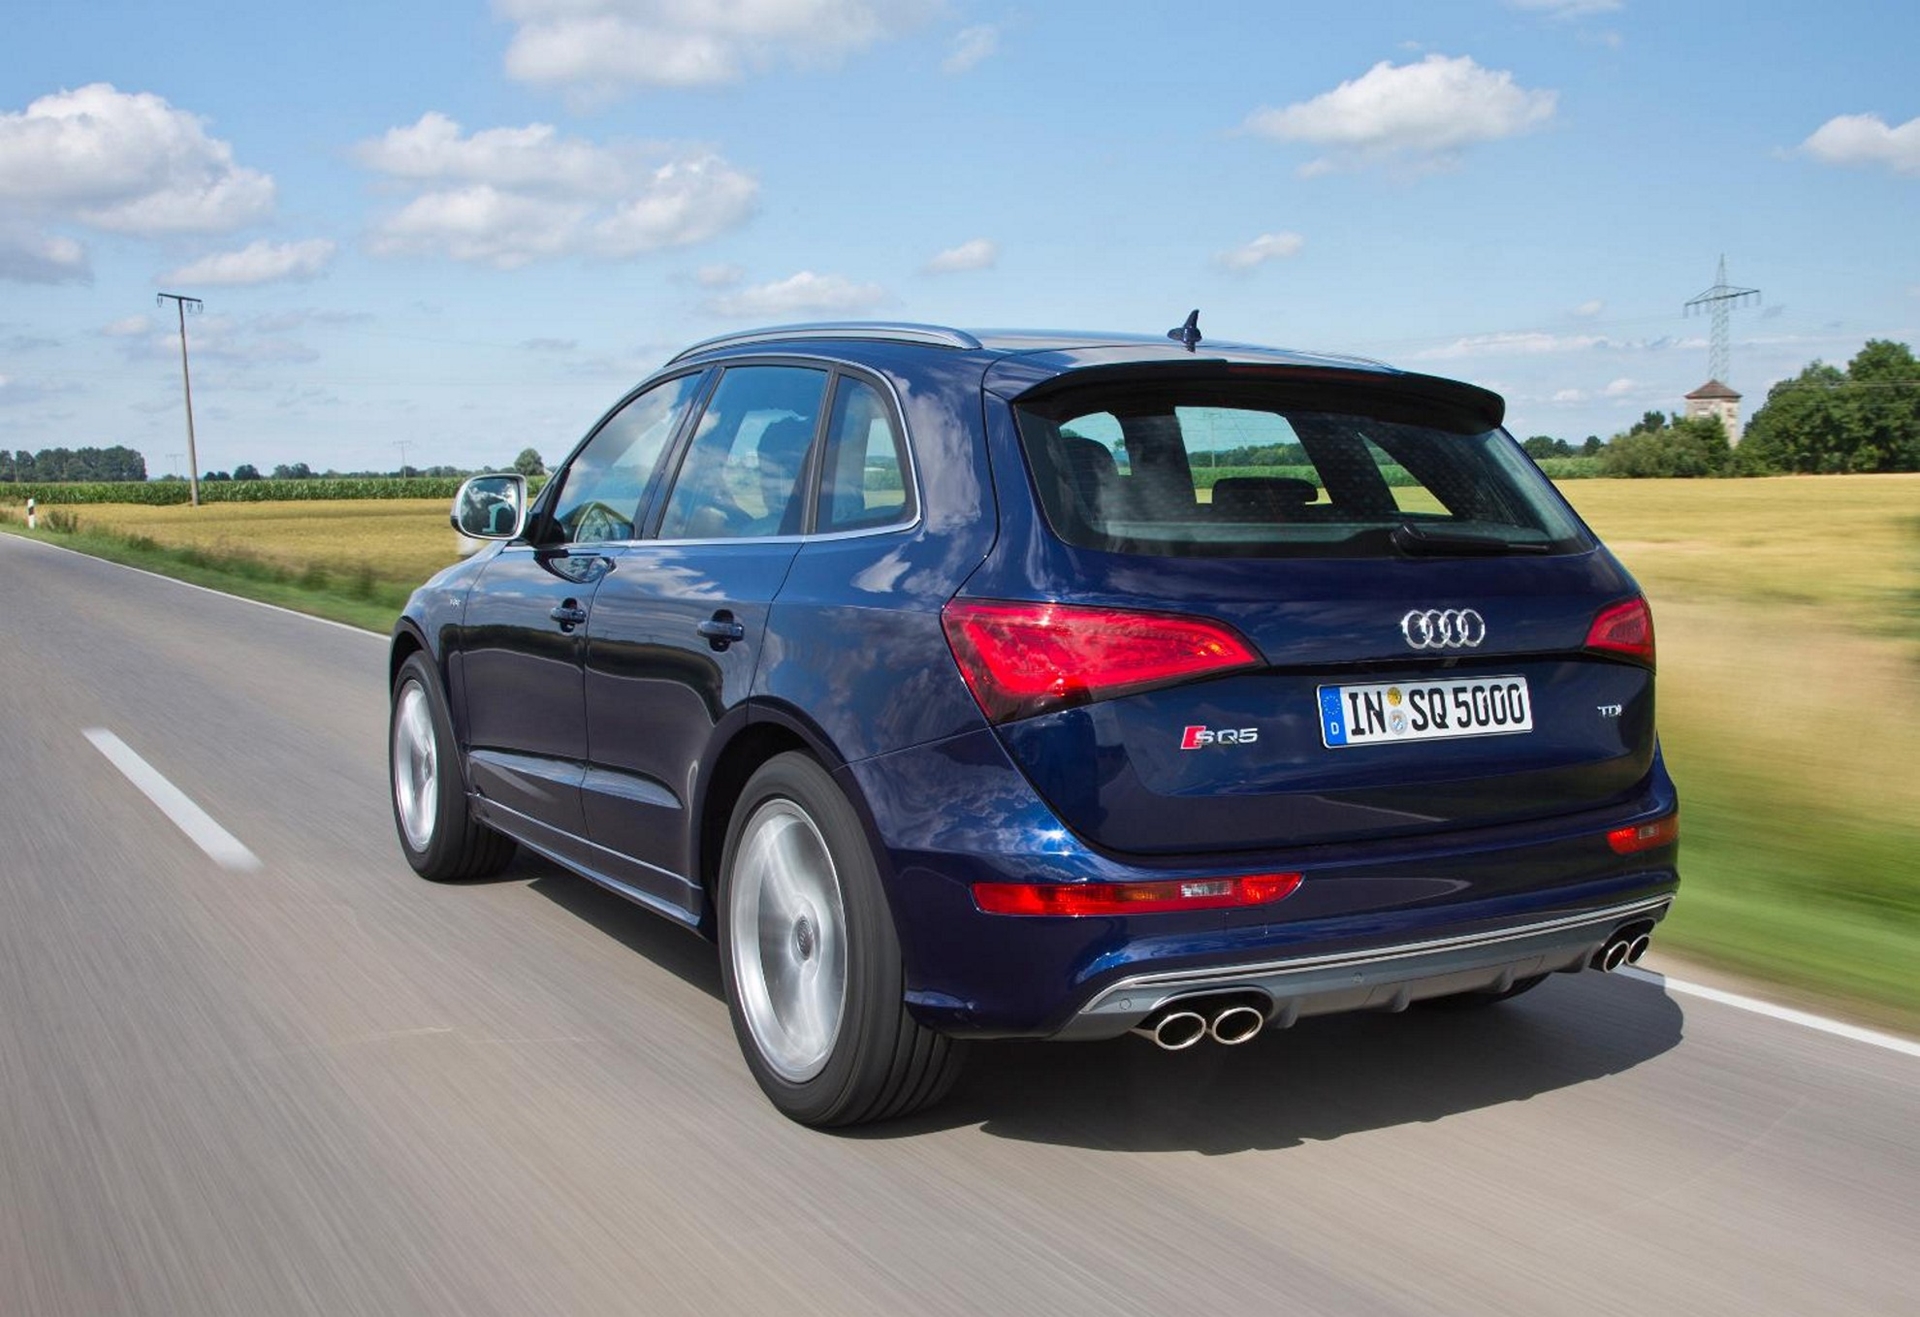 AUDI SQ5 TDI READY TO JOIN UK RANGE AS FIRST EVER DIESEL ‘S’ MODEL